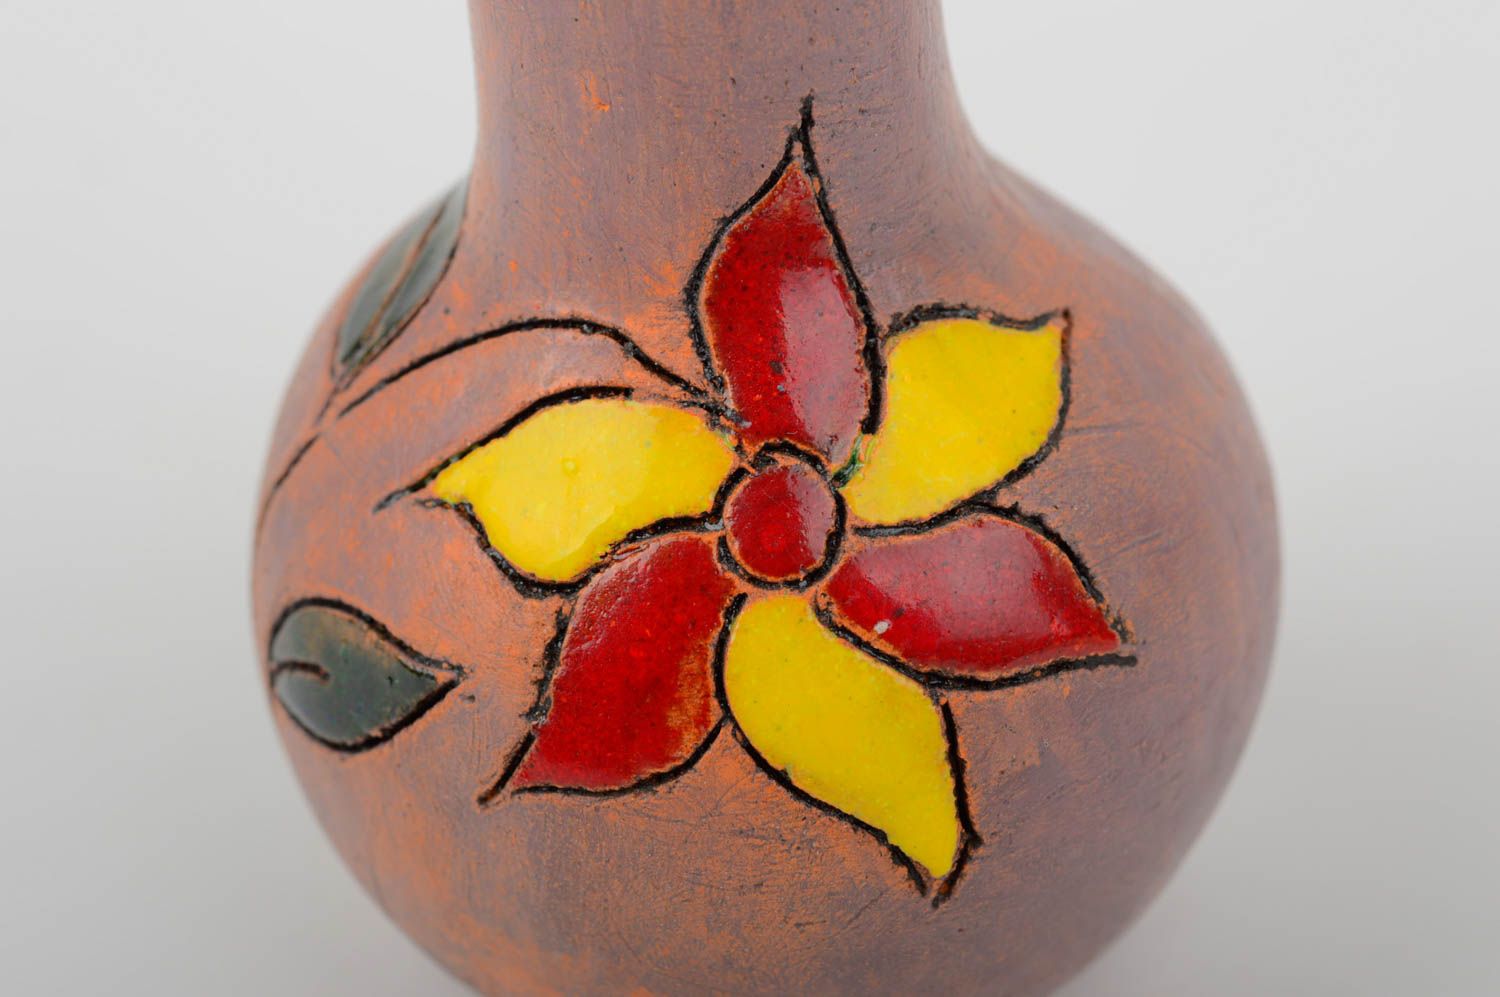 Handmade little 5 inches clay hand-painted with floral design flower vase 0,28 lb photo 5